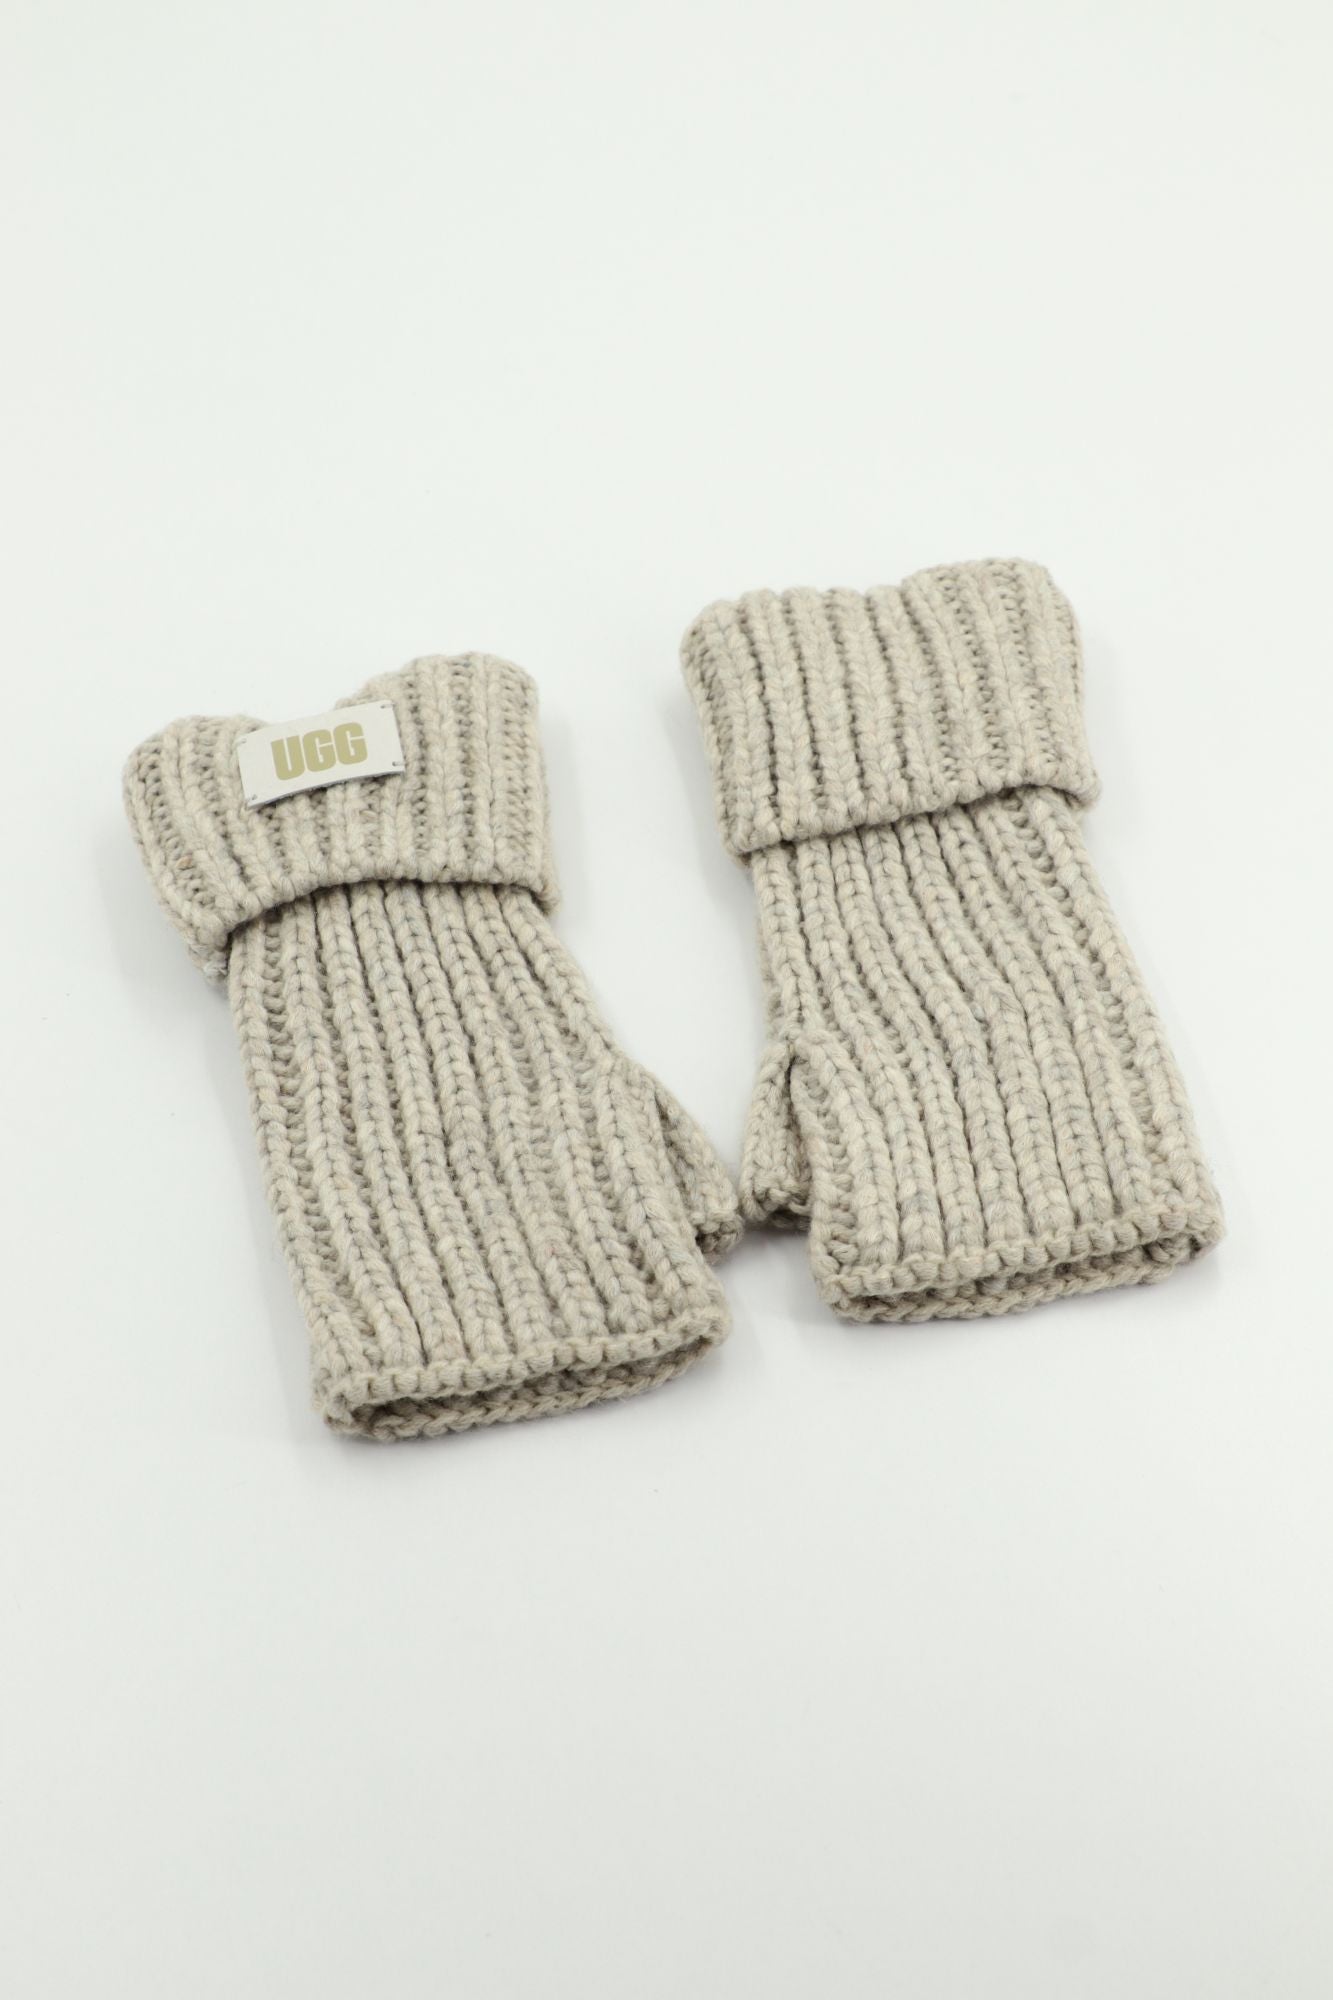 UGG CHUNKY FINGERLESS CUFF GLO en color GRIS (1)